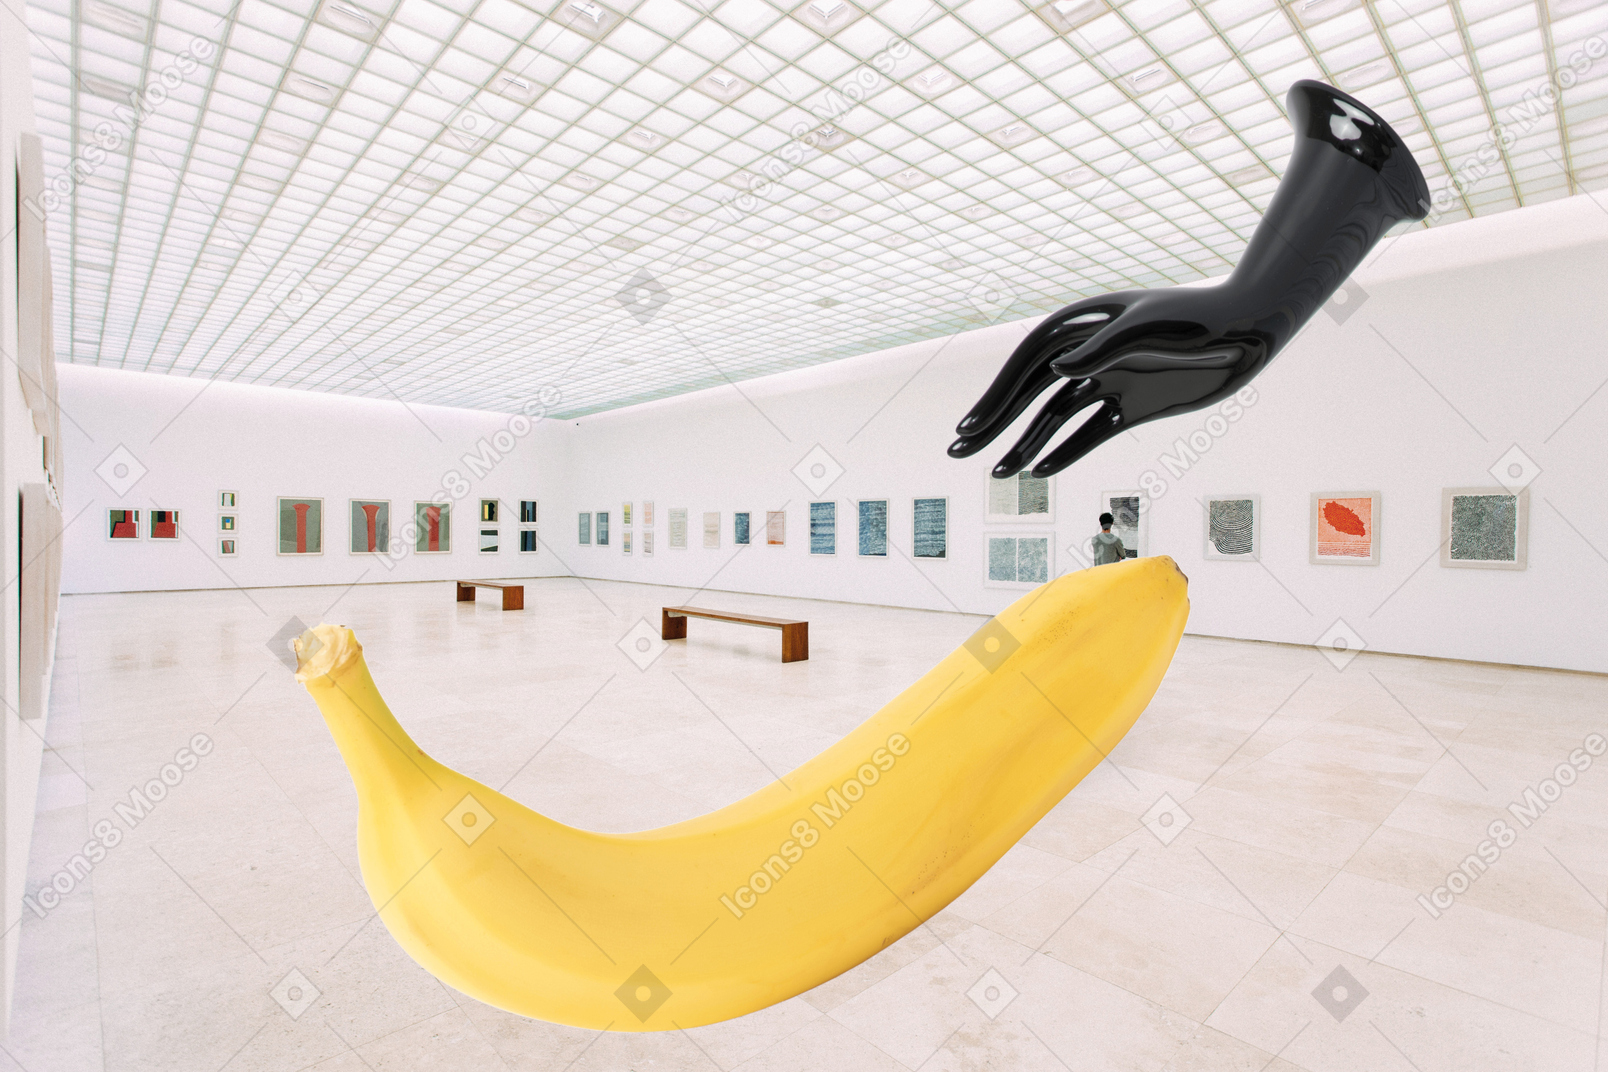 Giant black pkastic hand trying to reach giant banana in museum